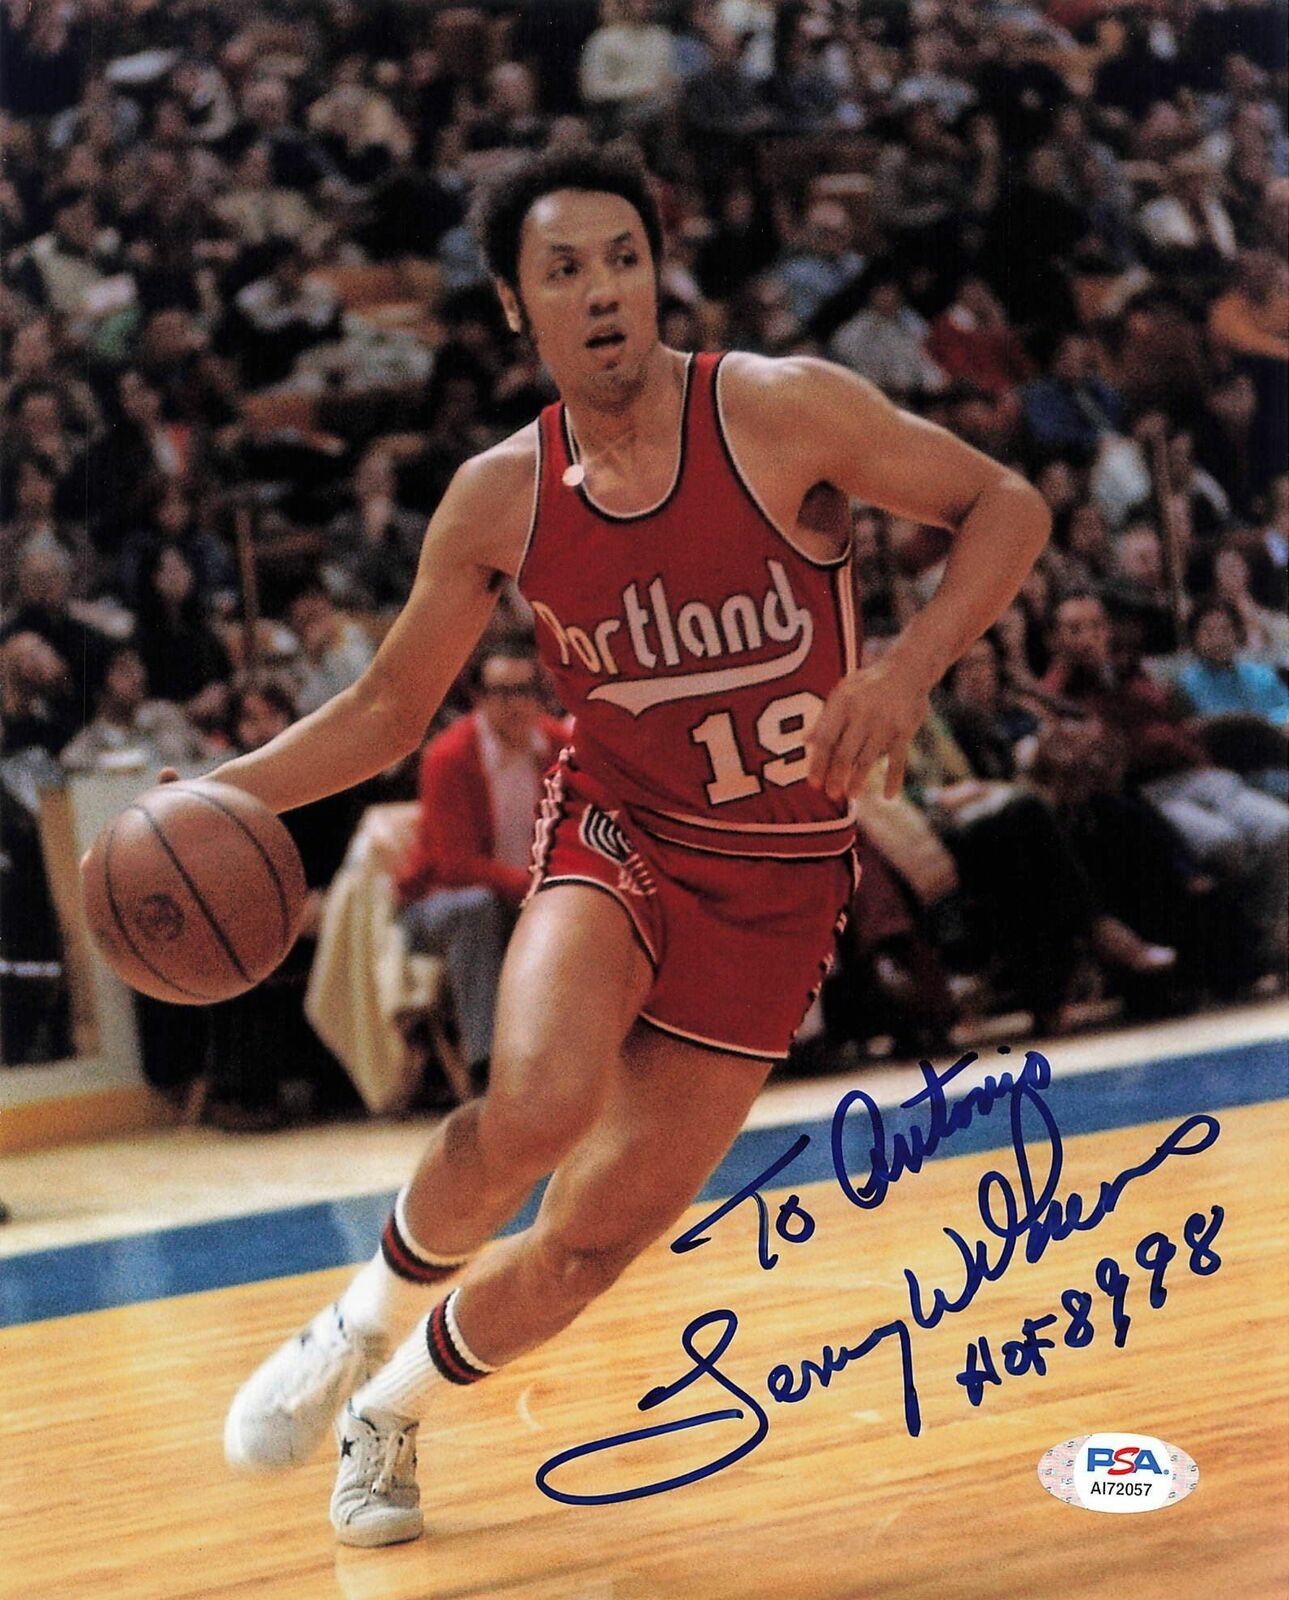 LENNY WILKENS signed 8x10 Photo Poster painting PSA/DNA Portland Trailblazers Autographed